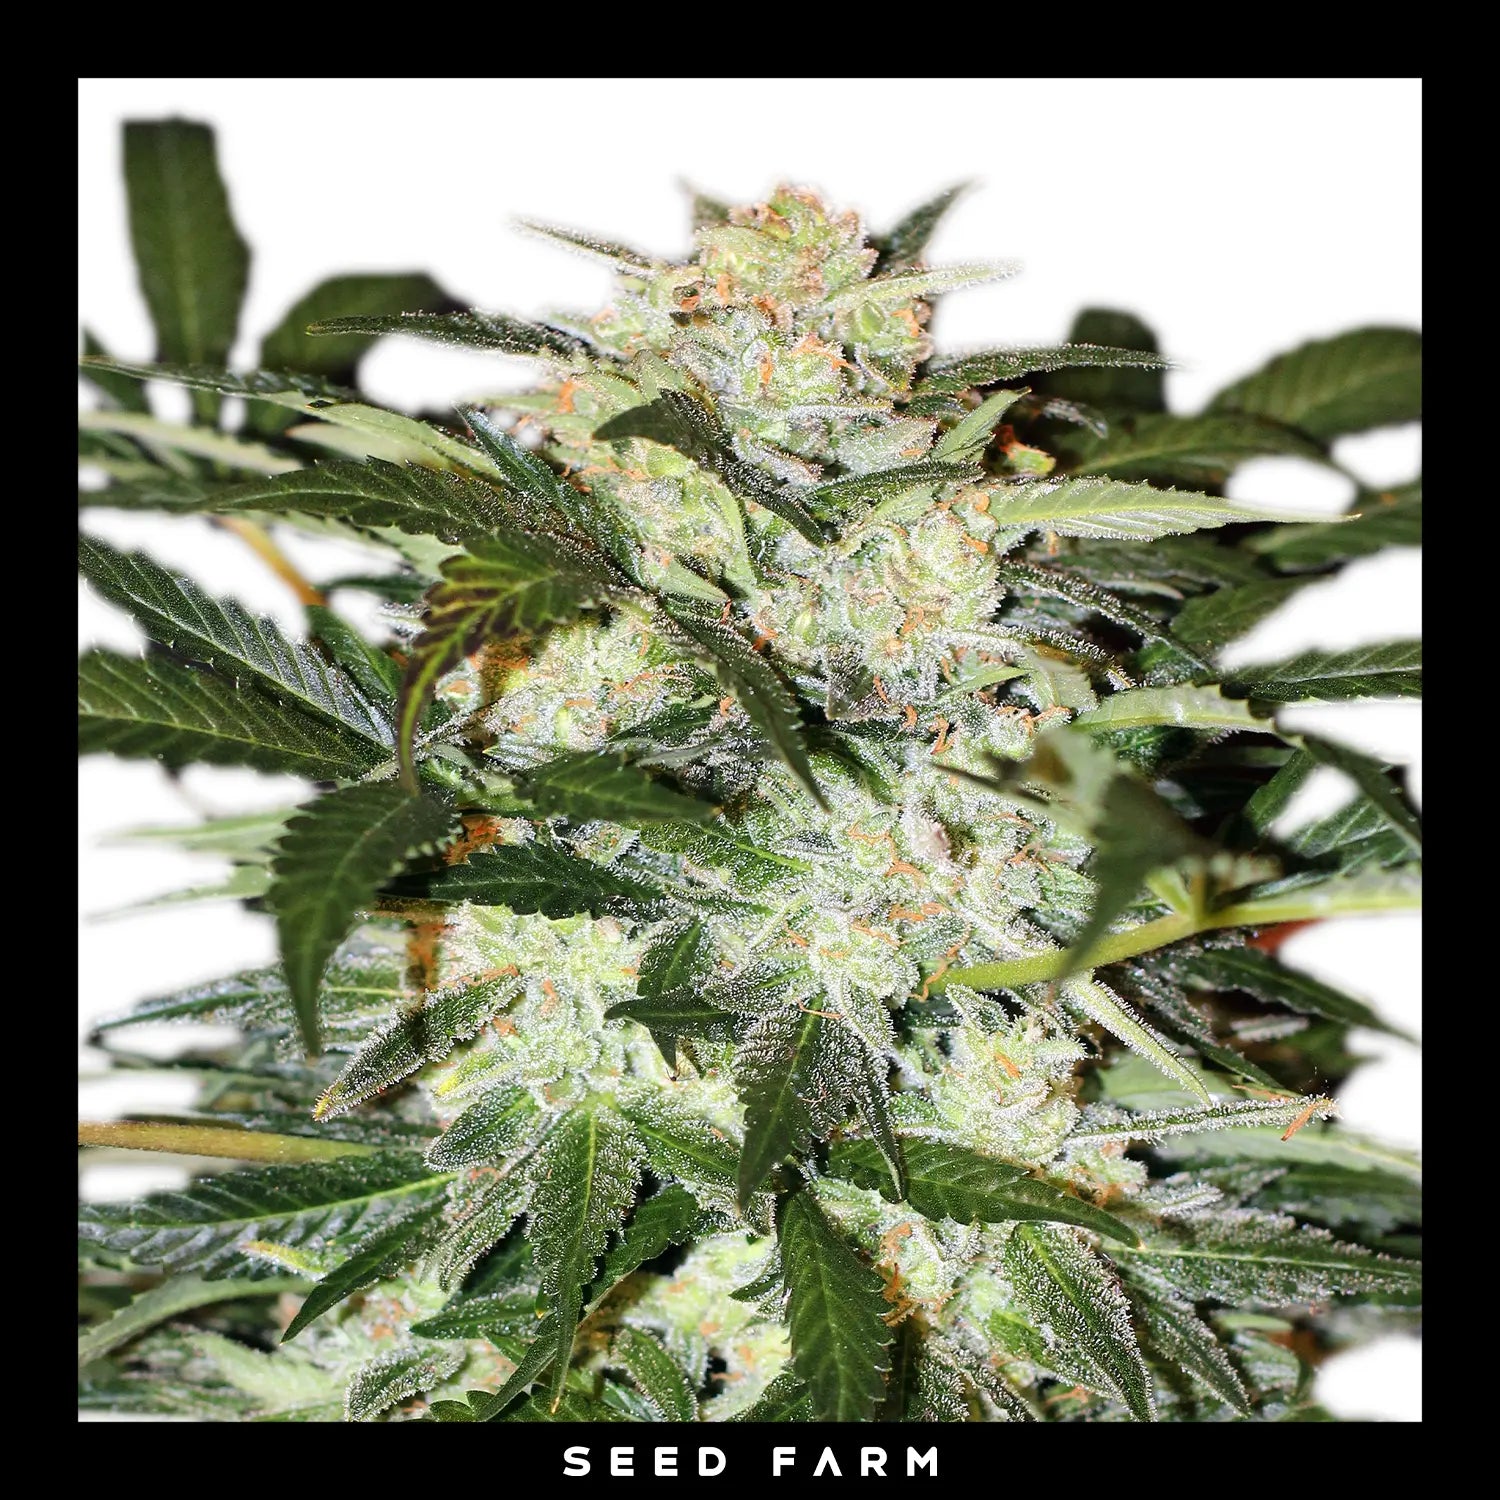 Exotic Seed - MONSTER MASH - Automatic